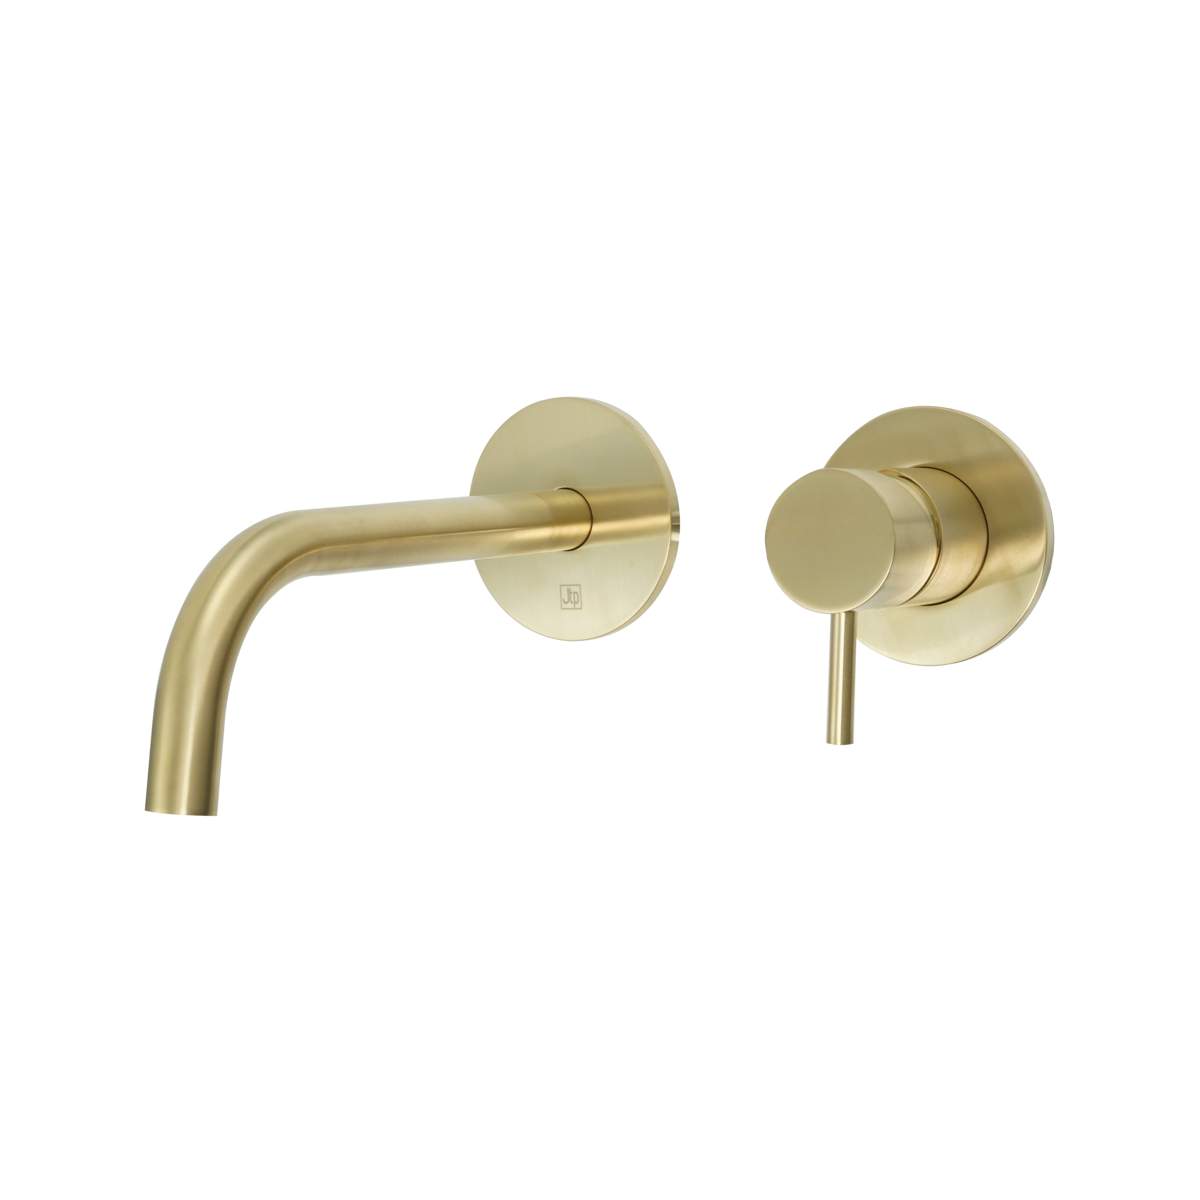 JTP Vos Brushed Brass Single Lever Wall Mounted Basin Mixer with Slim Spout (23173BBR)